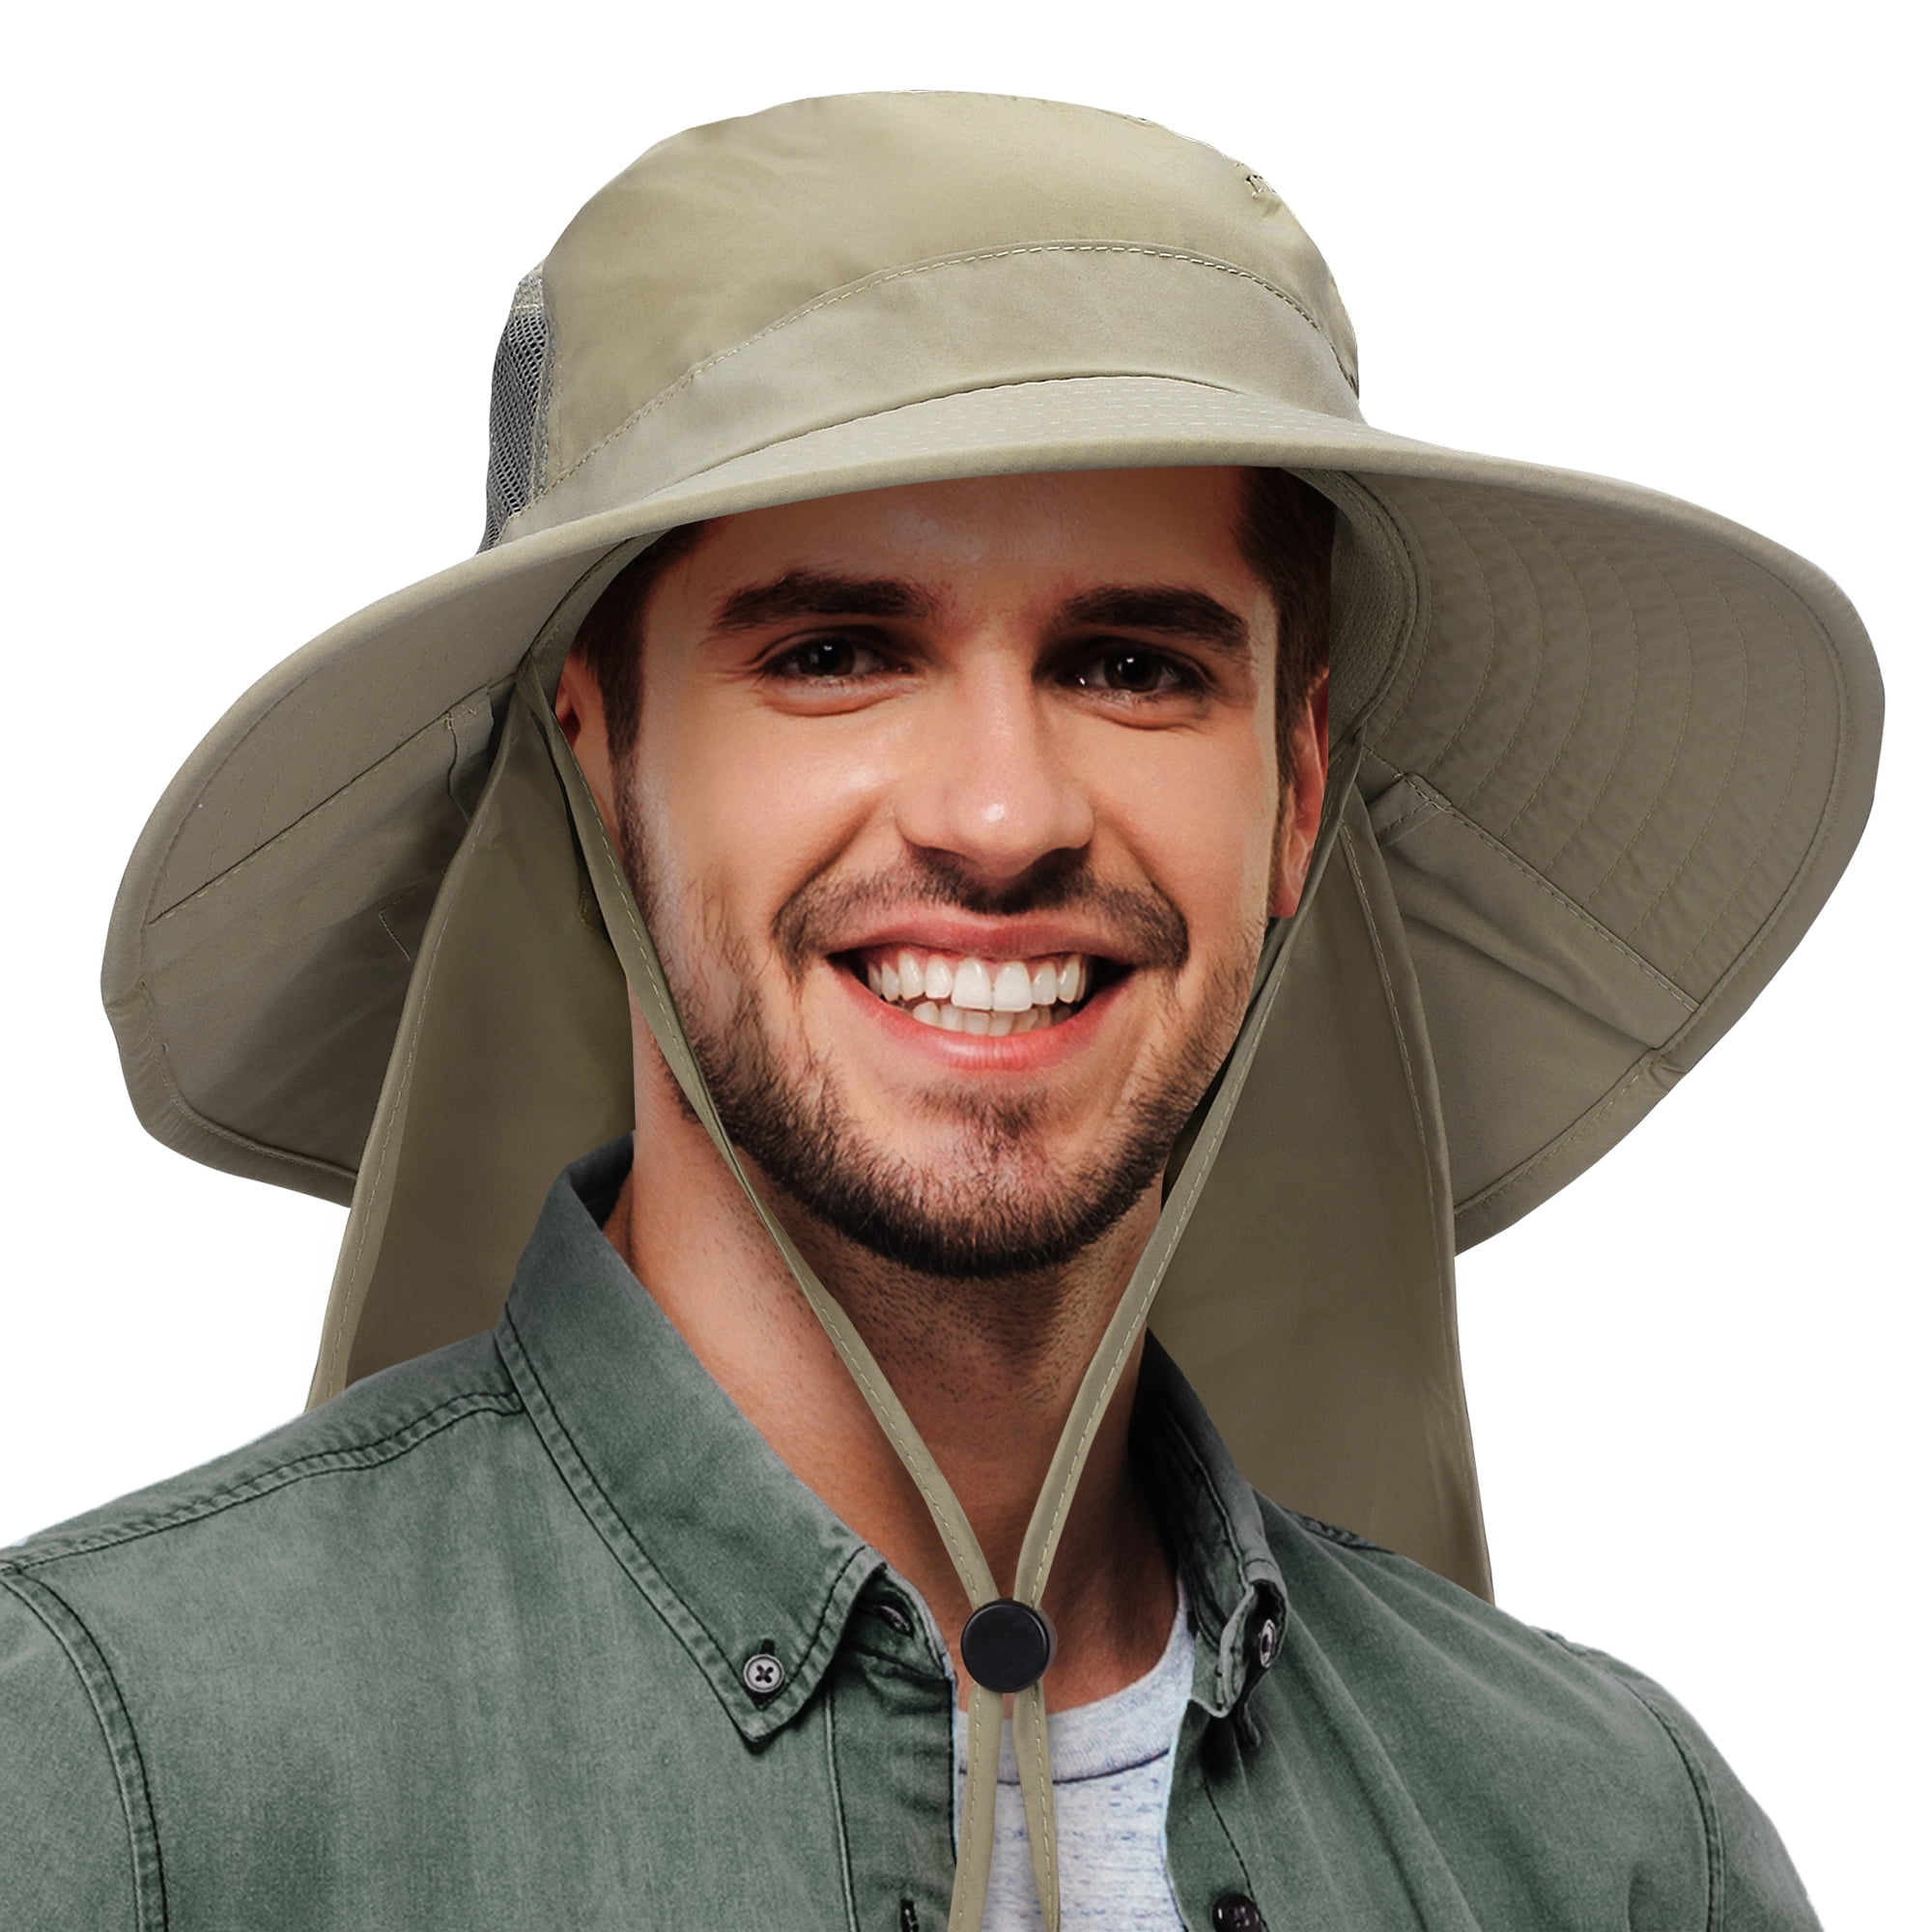 Solaris Men's Sun Hat Gray with Neck Flap, Wide Brim Fishing Safari Hiking Hat, UPF 50+ Protection, Adjustable Chin Strap, Size: One Size